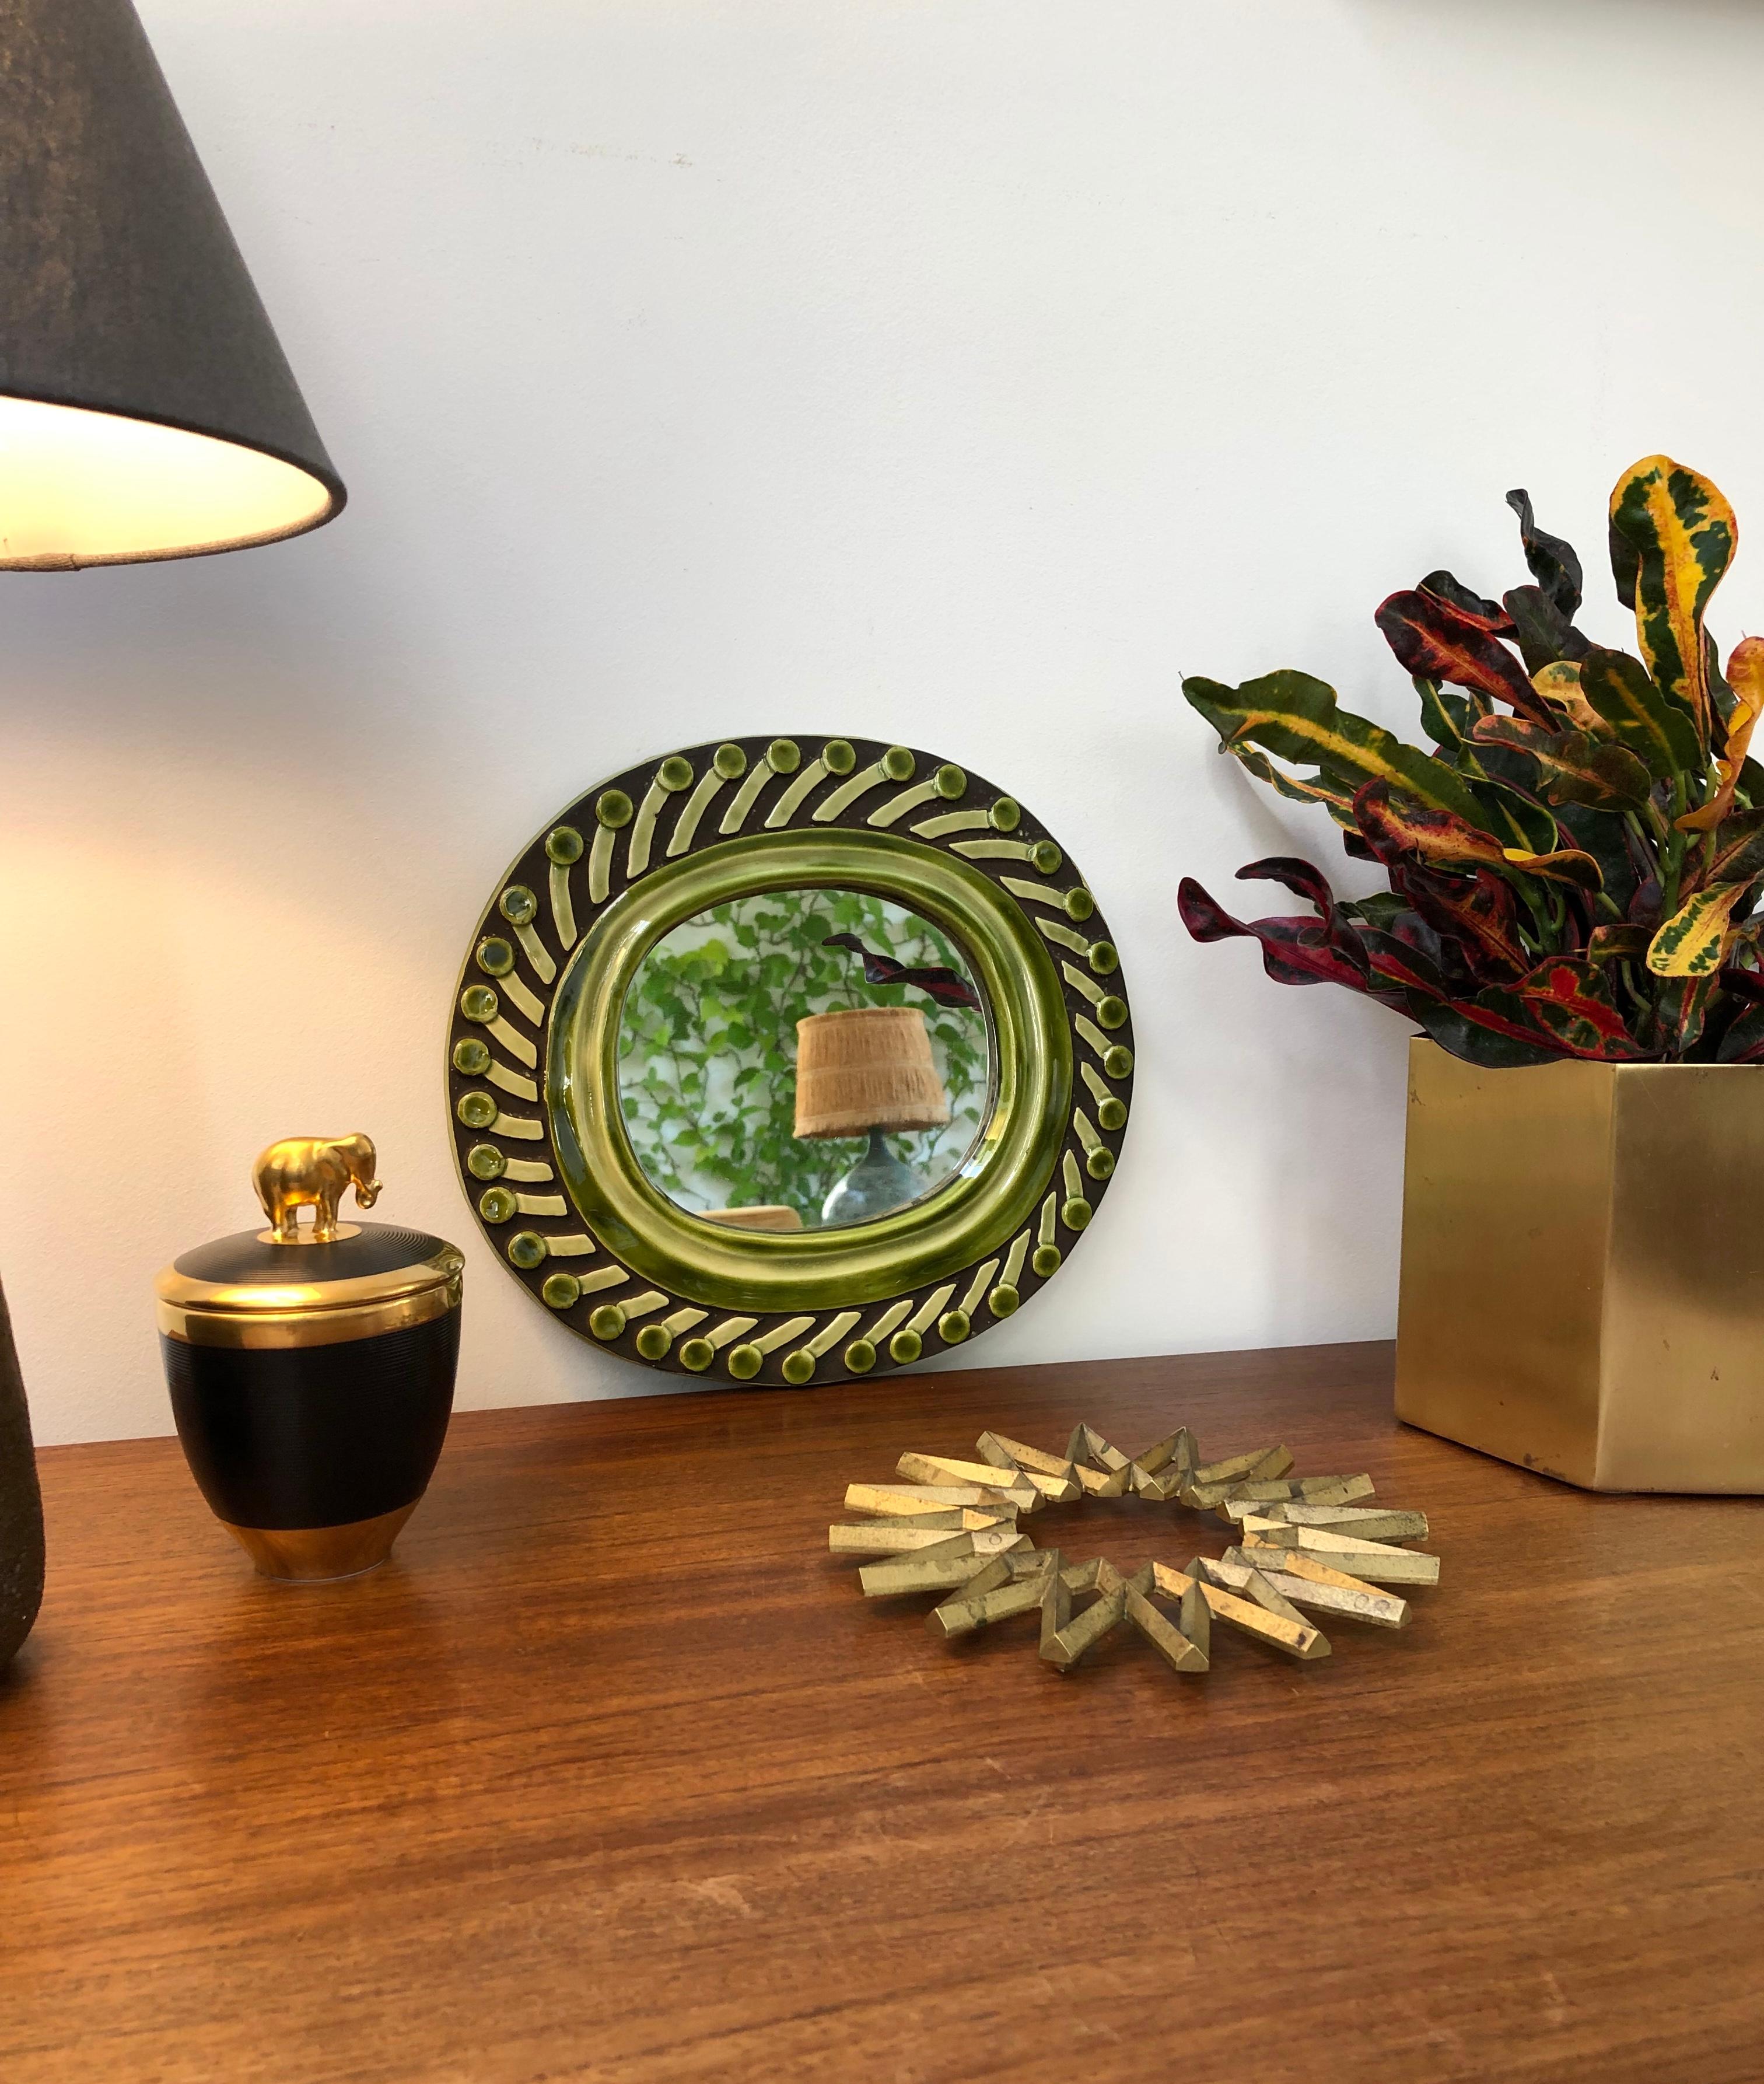 Ceramic wall mirror with green and chocolate brown colour accents, 'circa 1960s', by François Lembo (1930-2013). A whimsical porthole-shaped decorative wall mirror delights the eye. The mirror is framed with a green ceramic glaze surround with